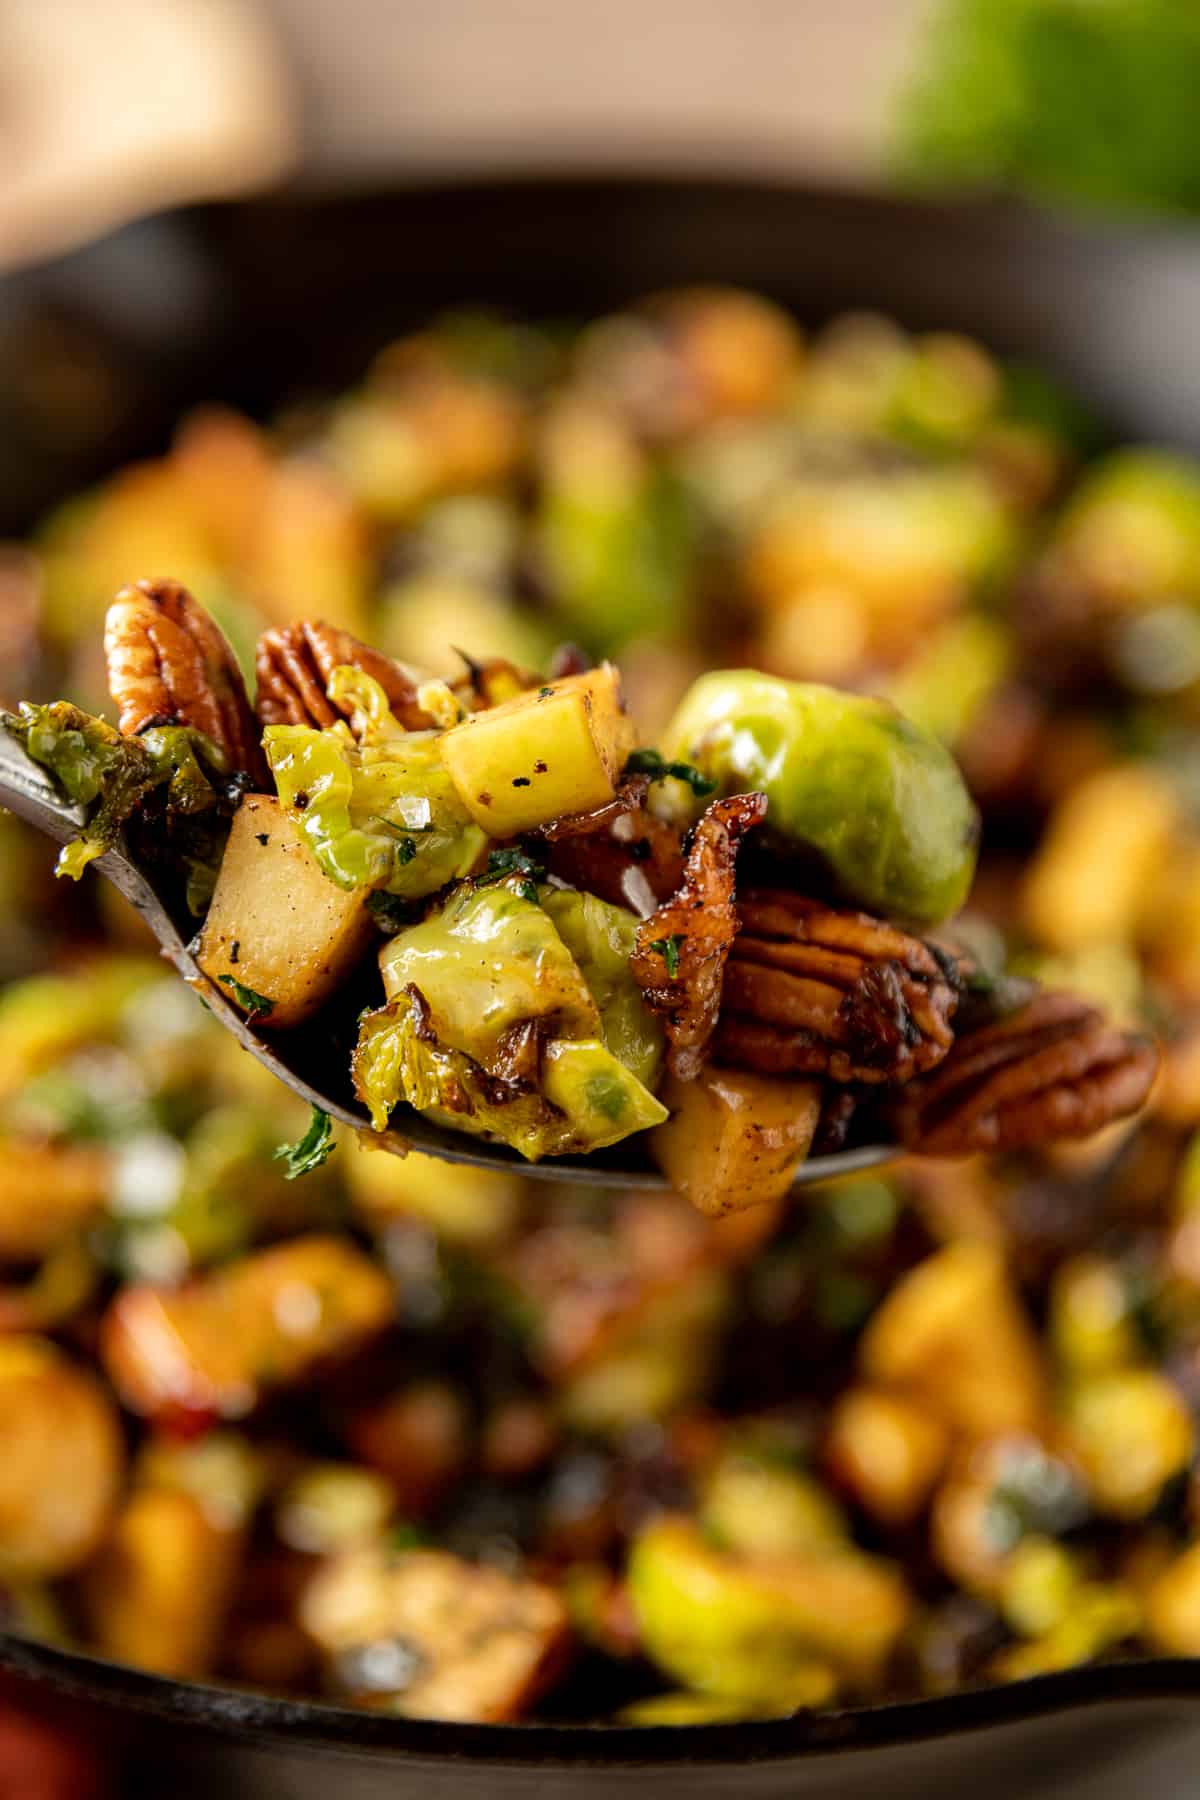 A fork full of brussels sprouts with apples, pecans, and balsamic glaze.